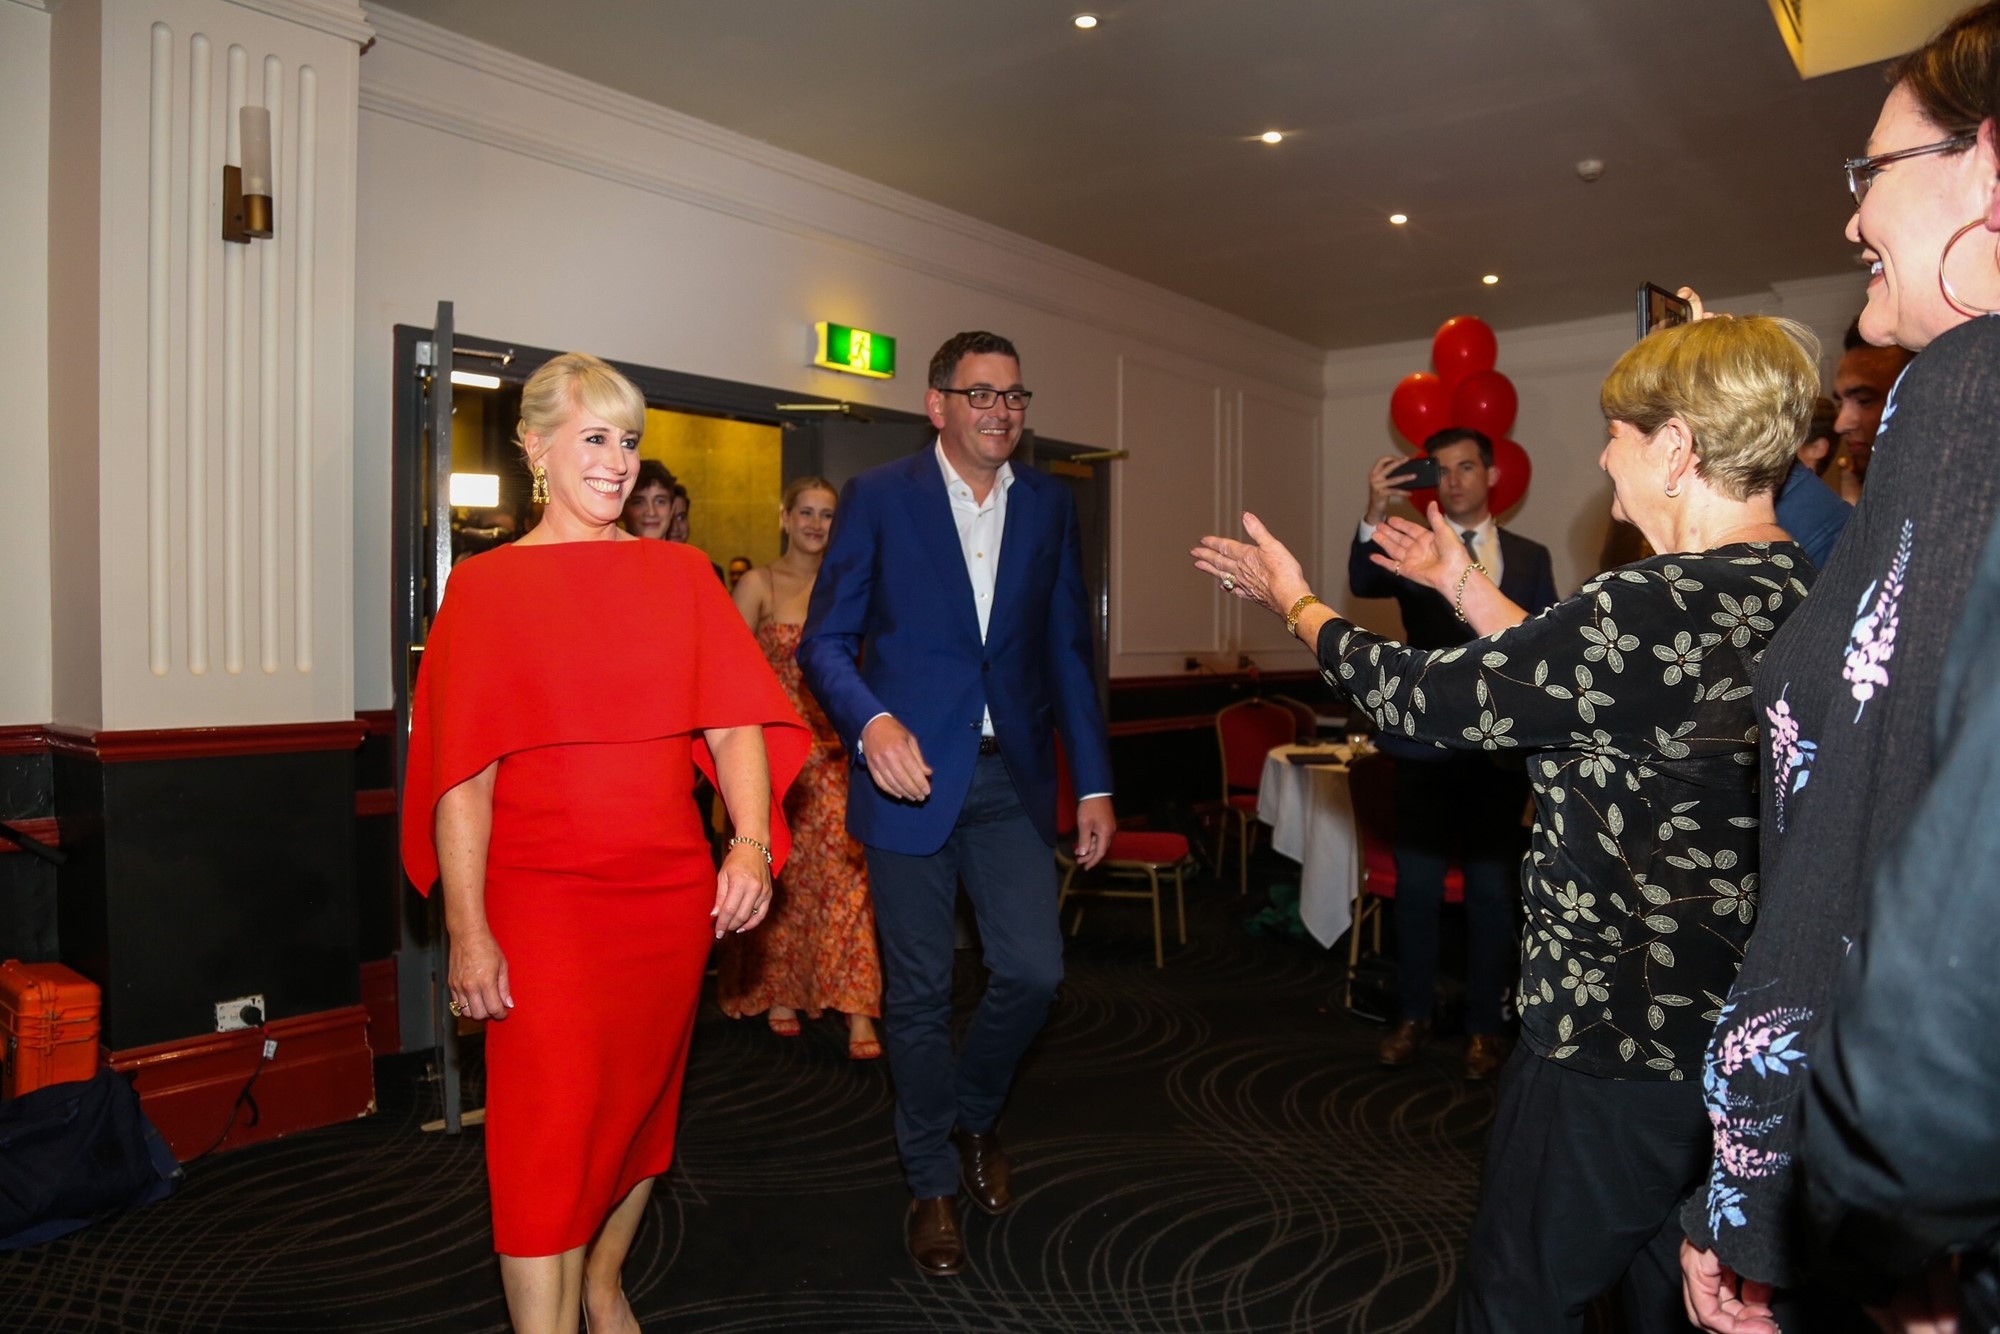 Dan Andrews walks into a room with his wife, who is wearing red.